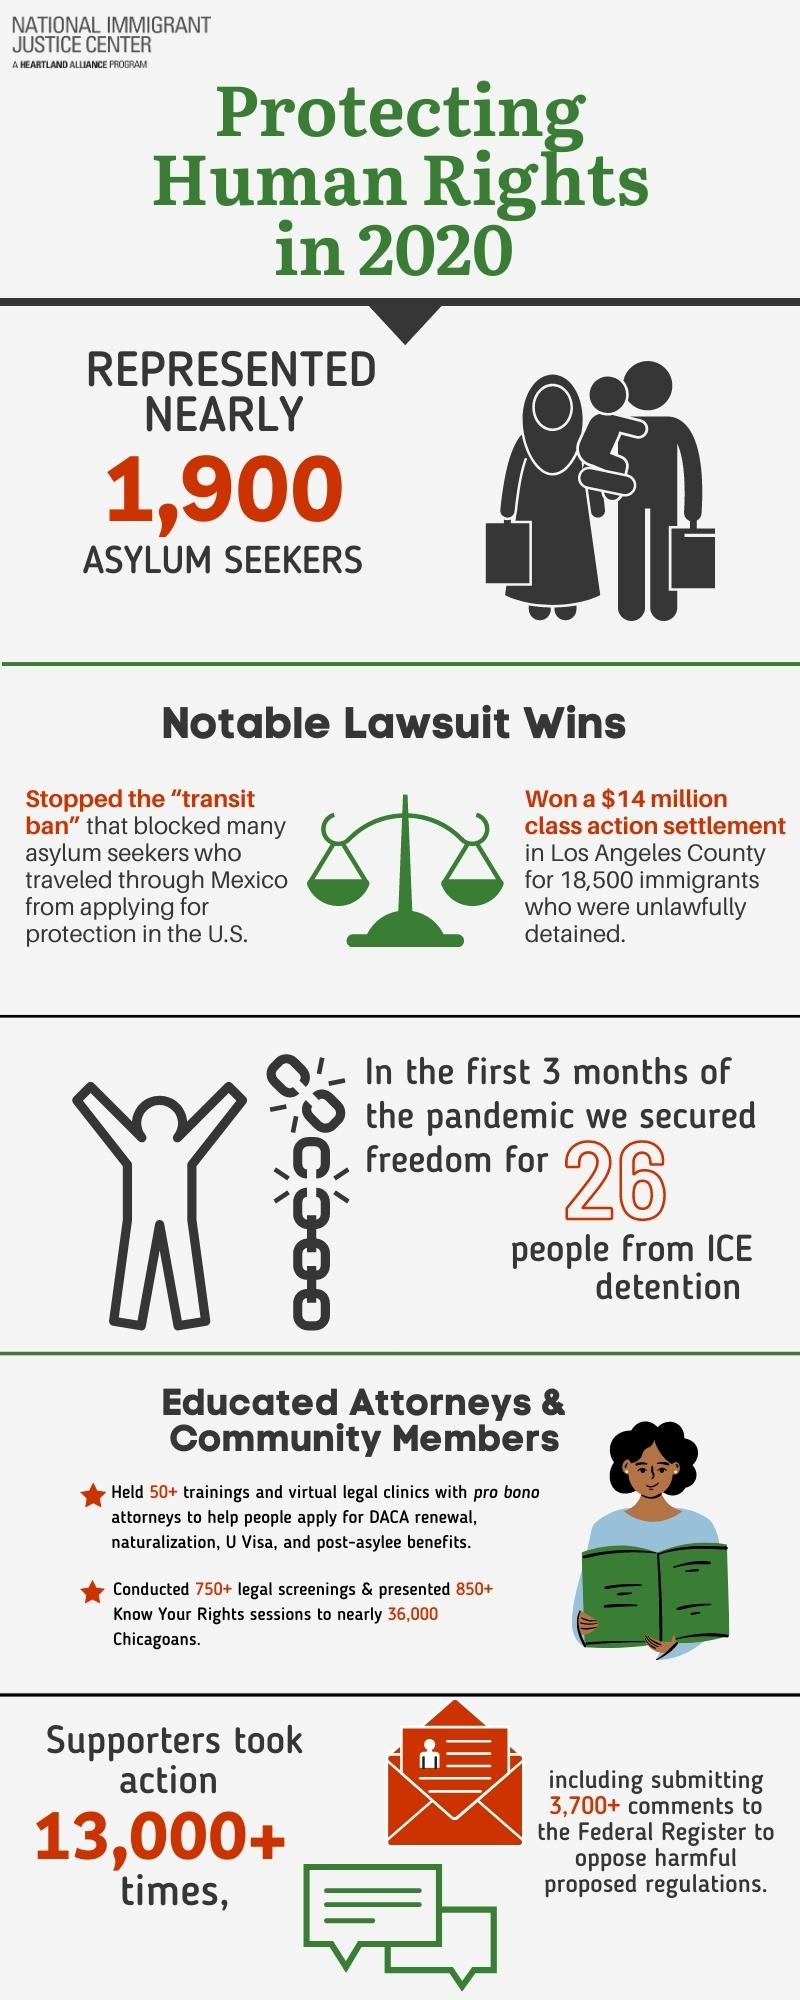 Infographic with stats about ways NIJC and supporters have protected human rights